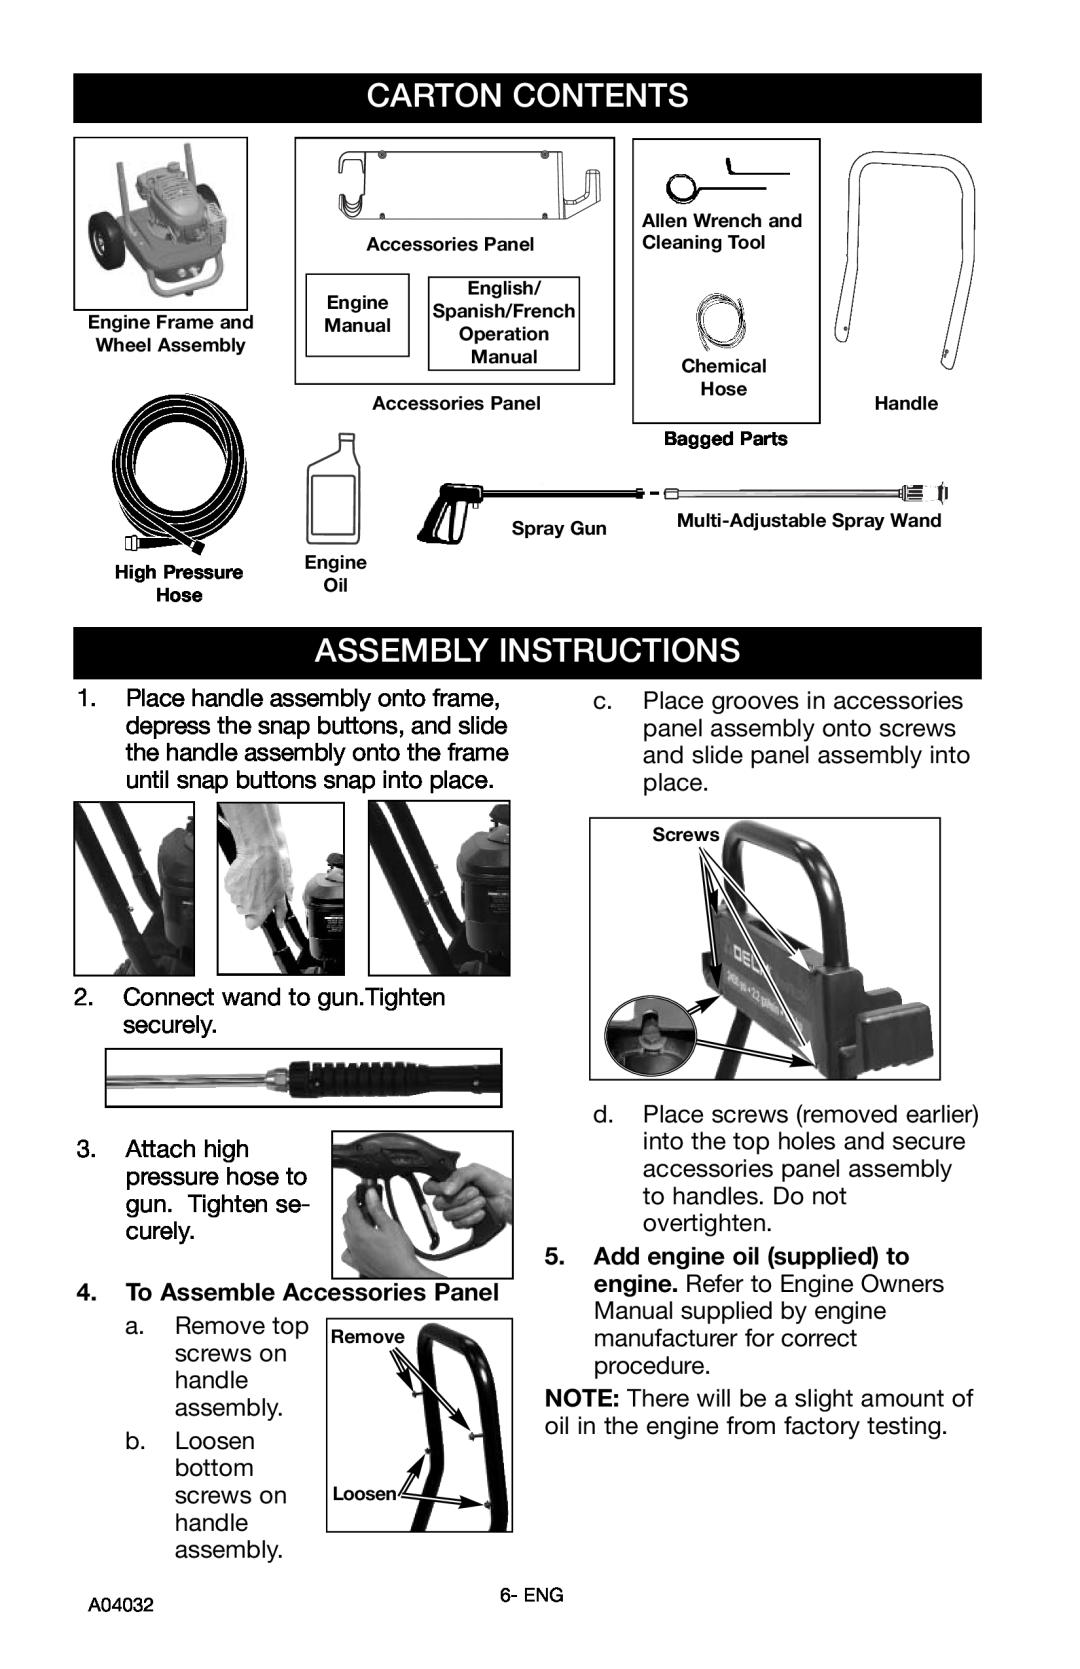 Delta DTT2450 Carton Contents, Assembly Instructions, To Assemble Accessories Panel, Add engine oil supplied to 